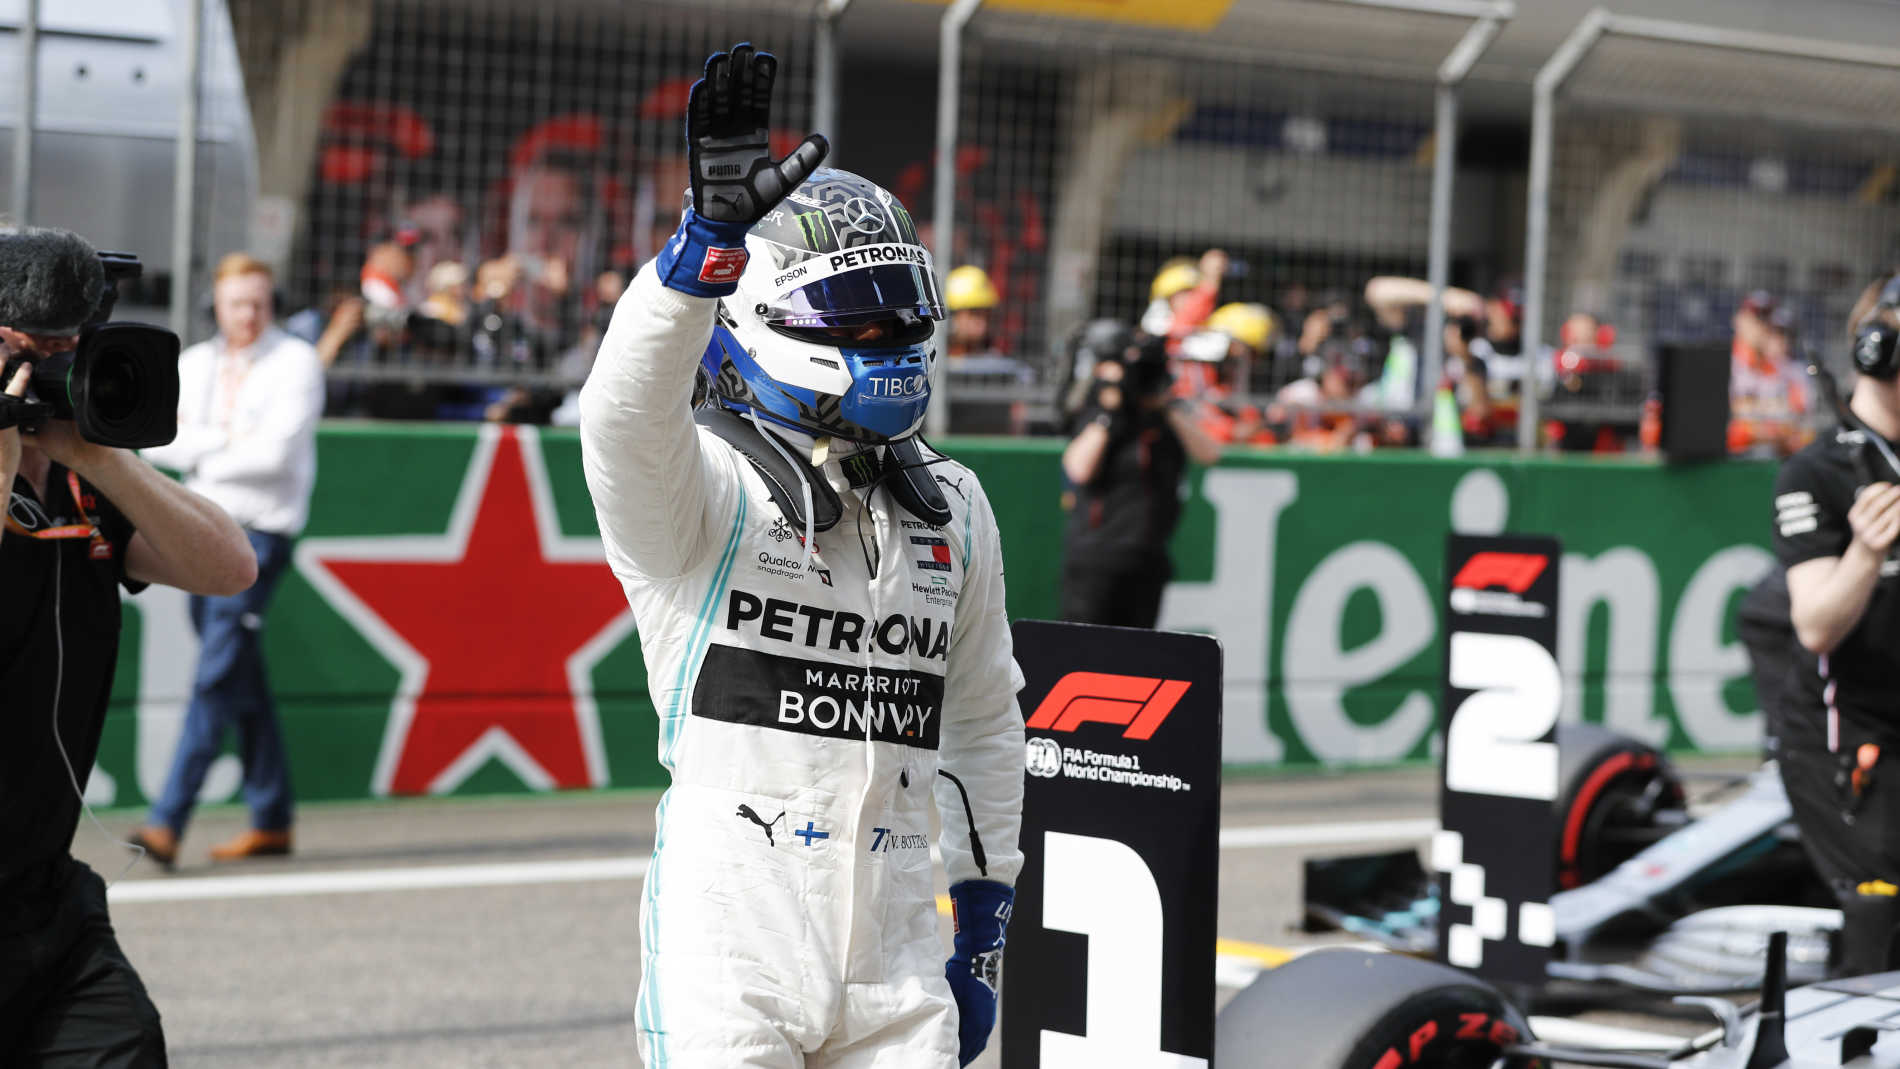 Staircase Dancer Postman Highlights and report from qualifying for the 2019 Chinese Grand Prix -  Bottas takes first pole of season as Mercedes lock out front row | Formula 1 ®